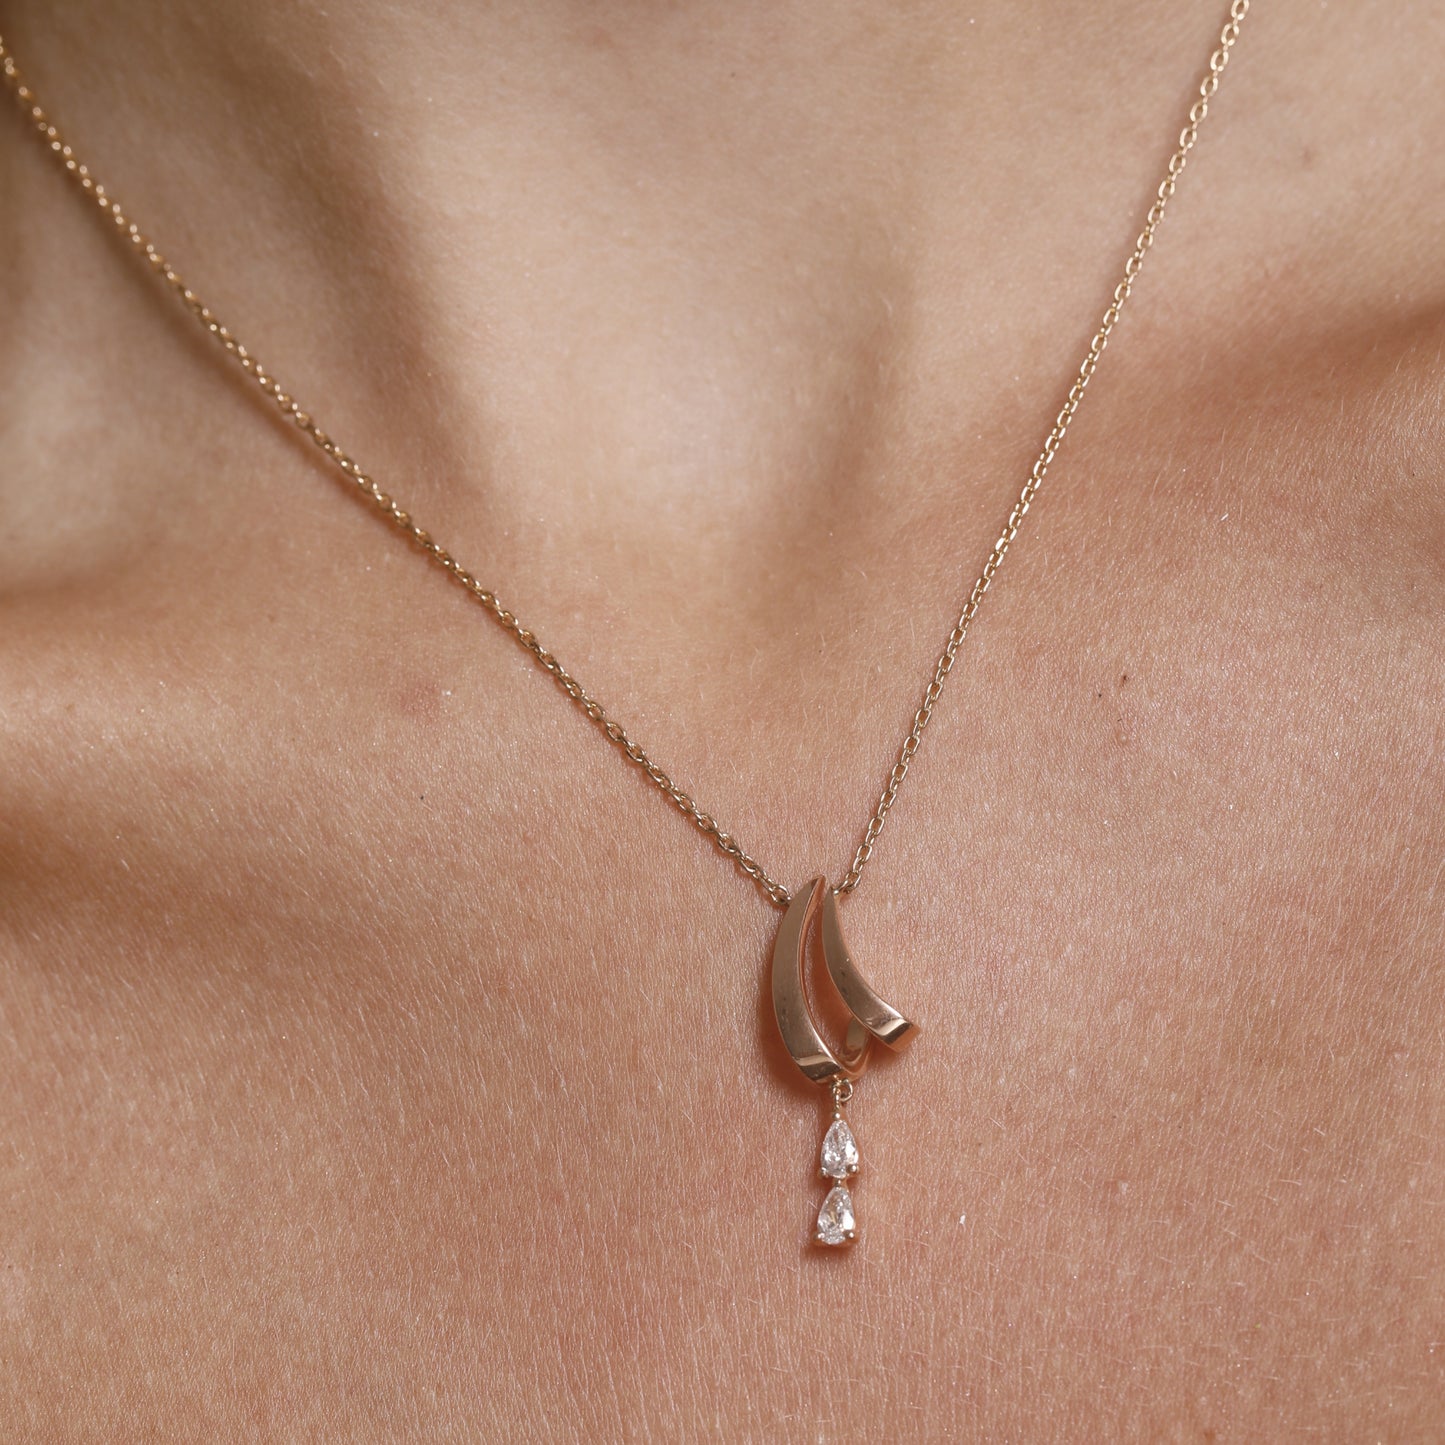 ANGEL TEARS NECKLACE